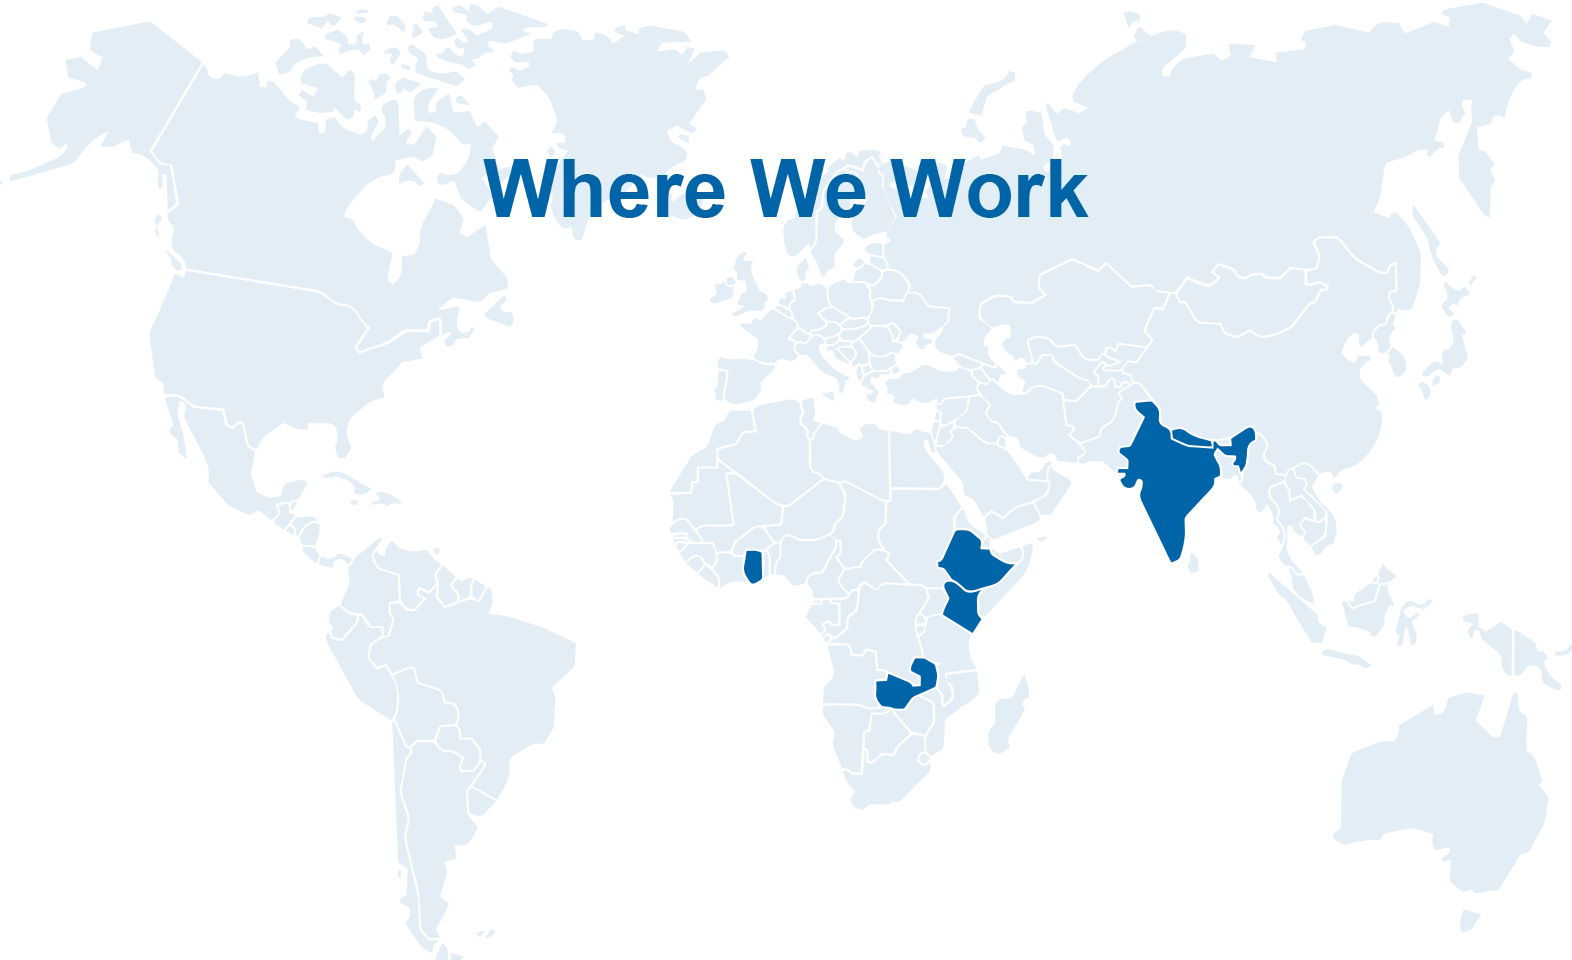 A map of the world with India, Nepal, Ethiopia, Ghana, Kenya and Zambia highlighted in blue. It shows Operation Eyesight's areas of work.